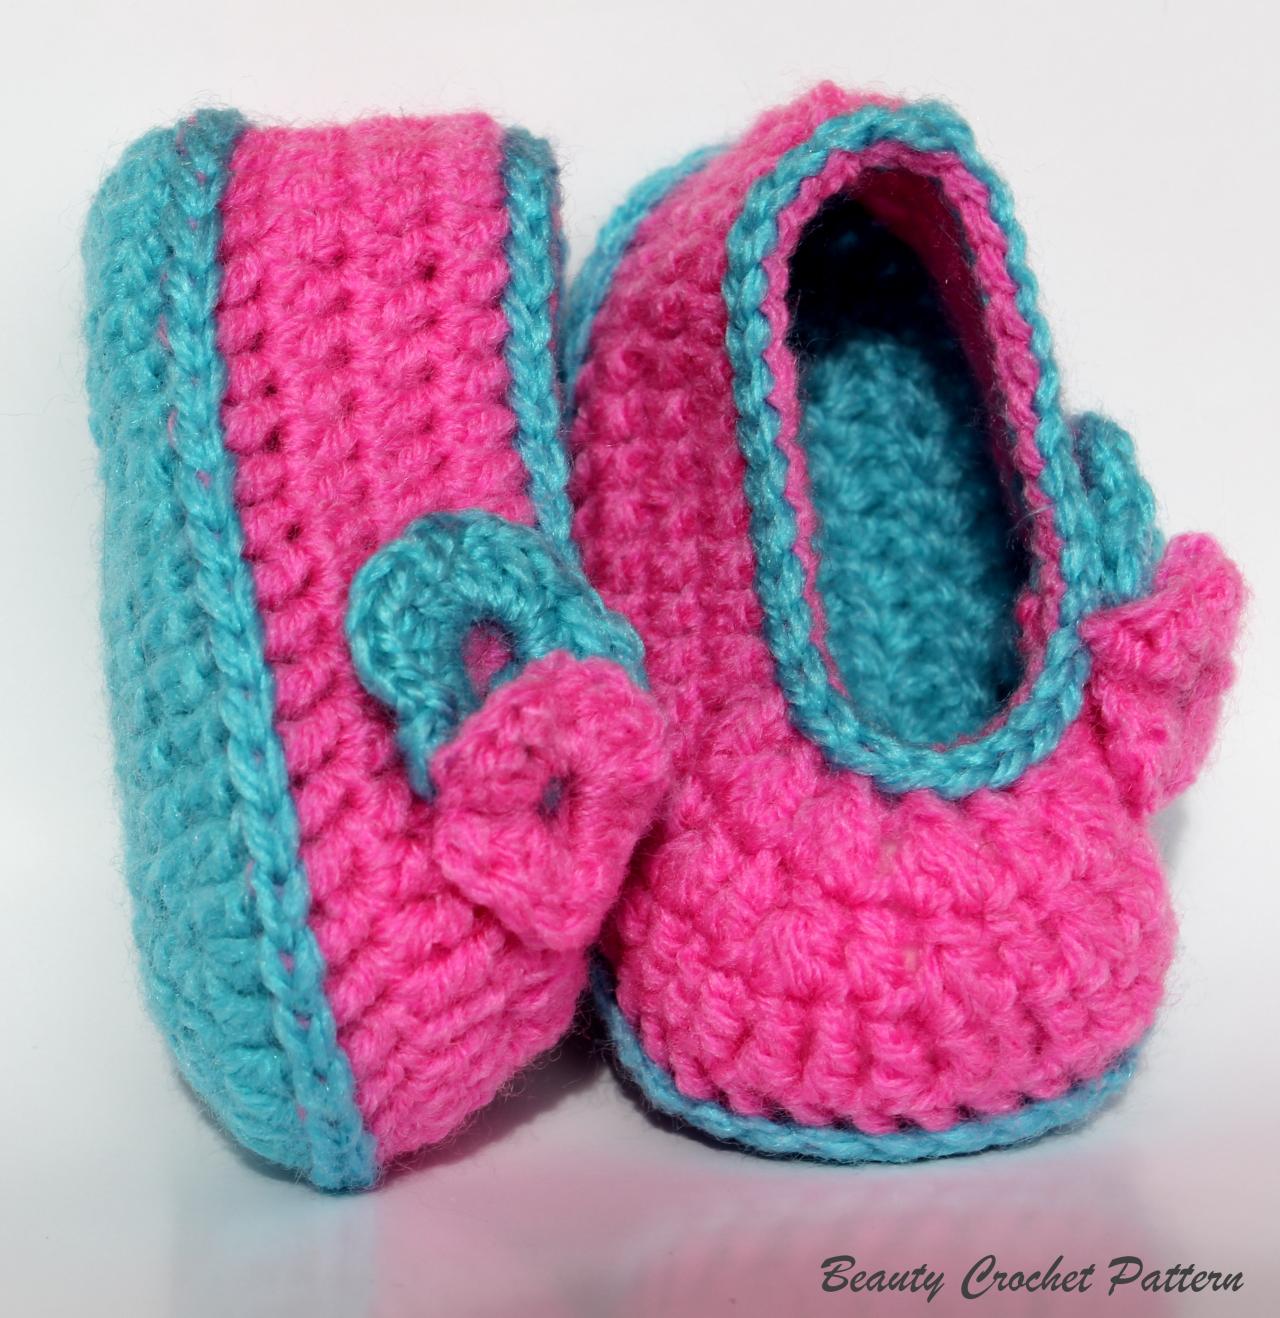 Crochet Baby Pattern Barbie Style Shoes Baby Girl Crochet Shoes Pattern, Pink Crochet Shoes